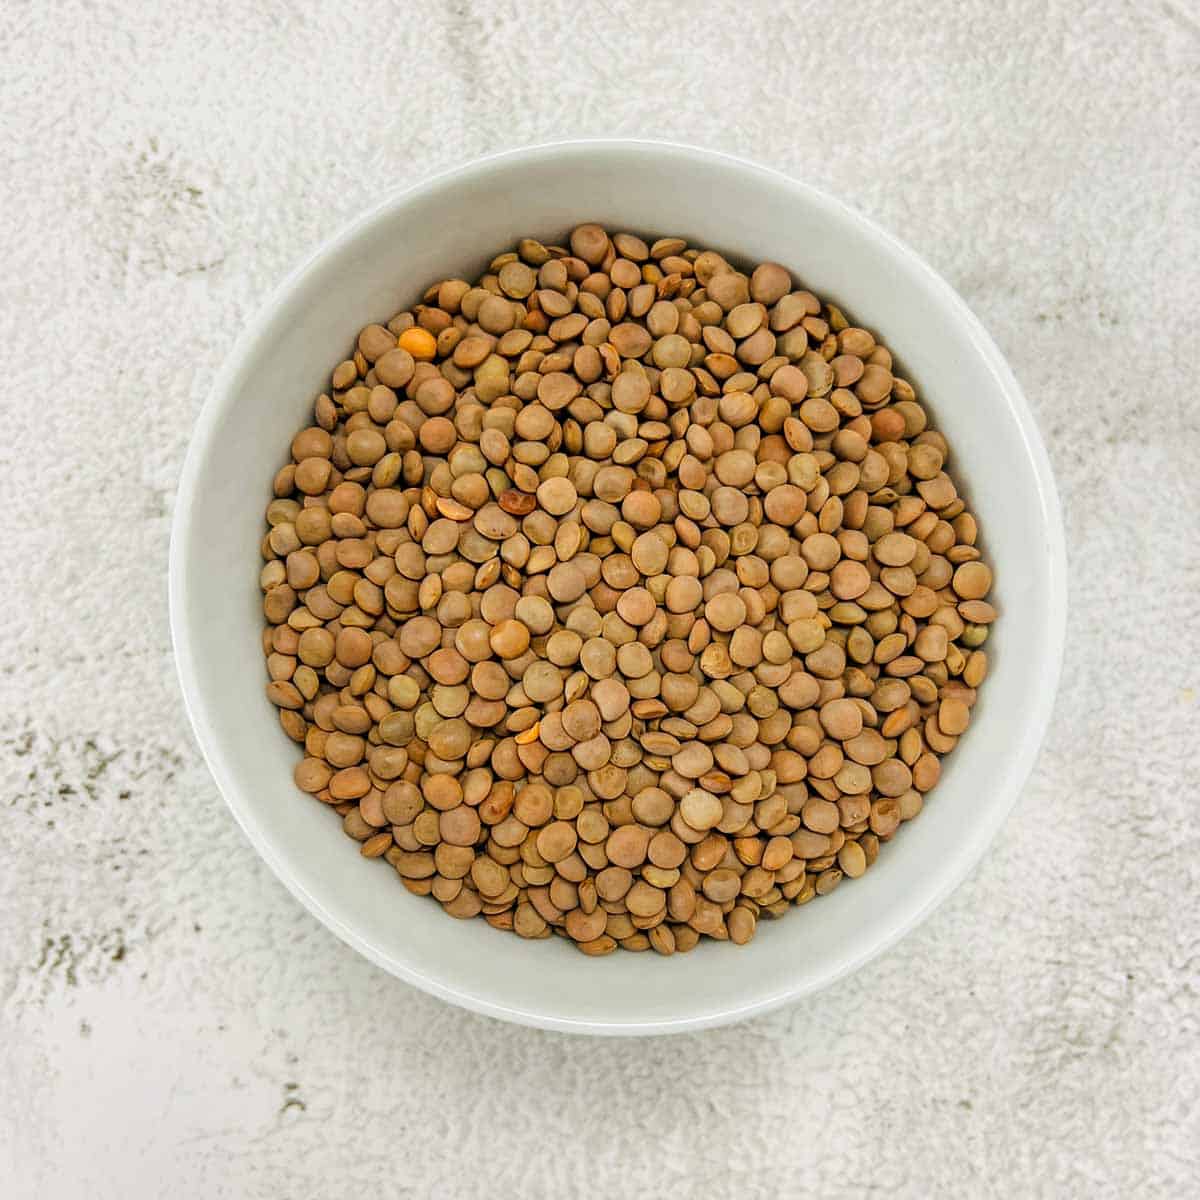 Dried brown lentils on a white bowl.